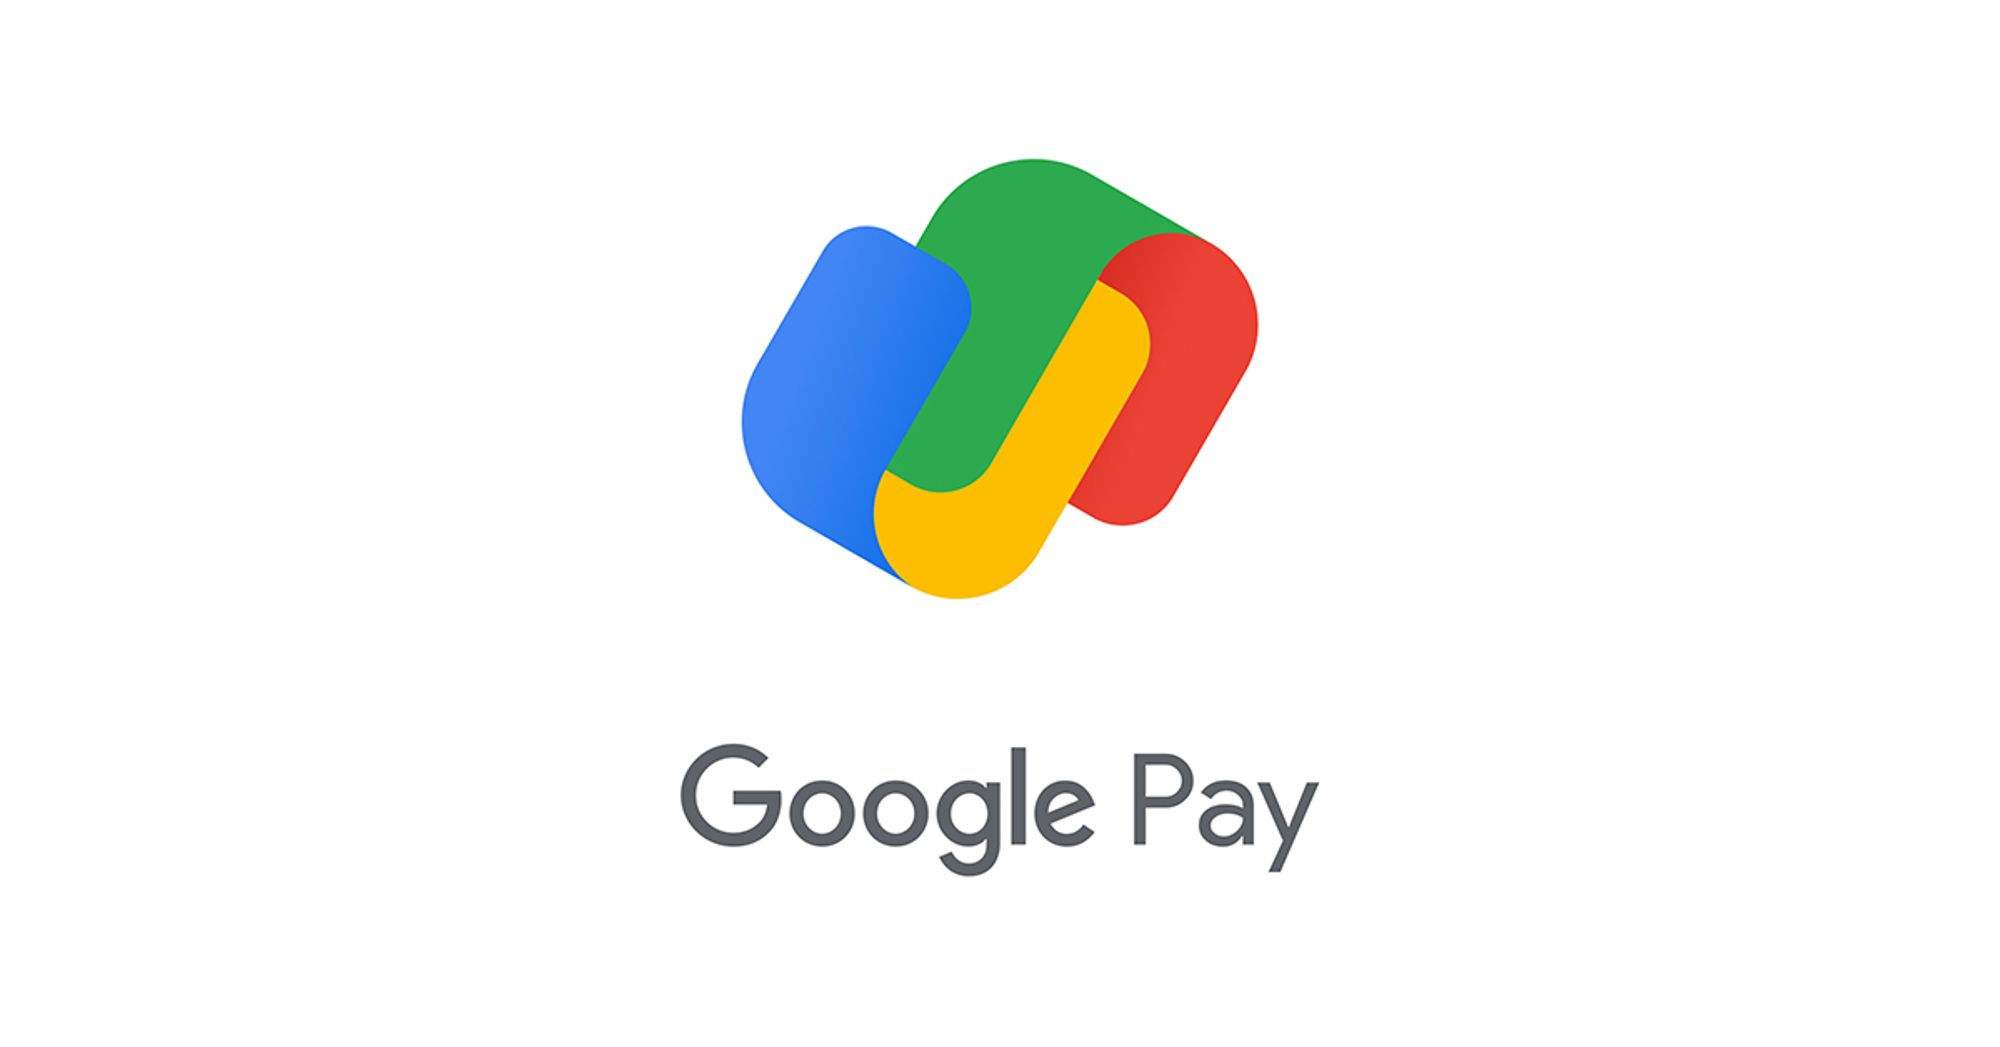 Join me on Google Pay!